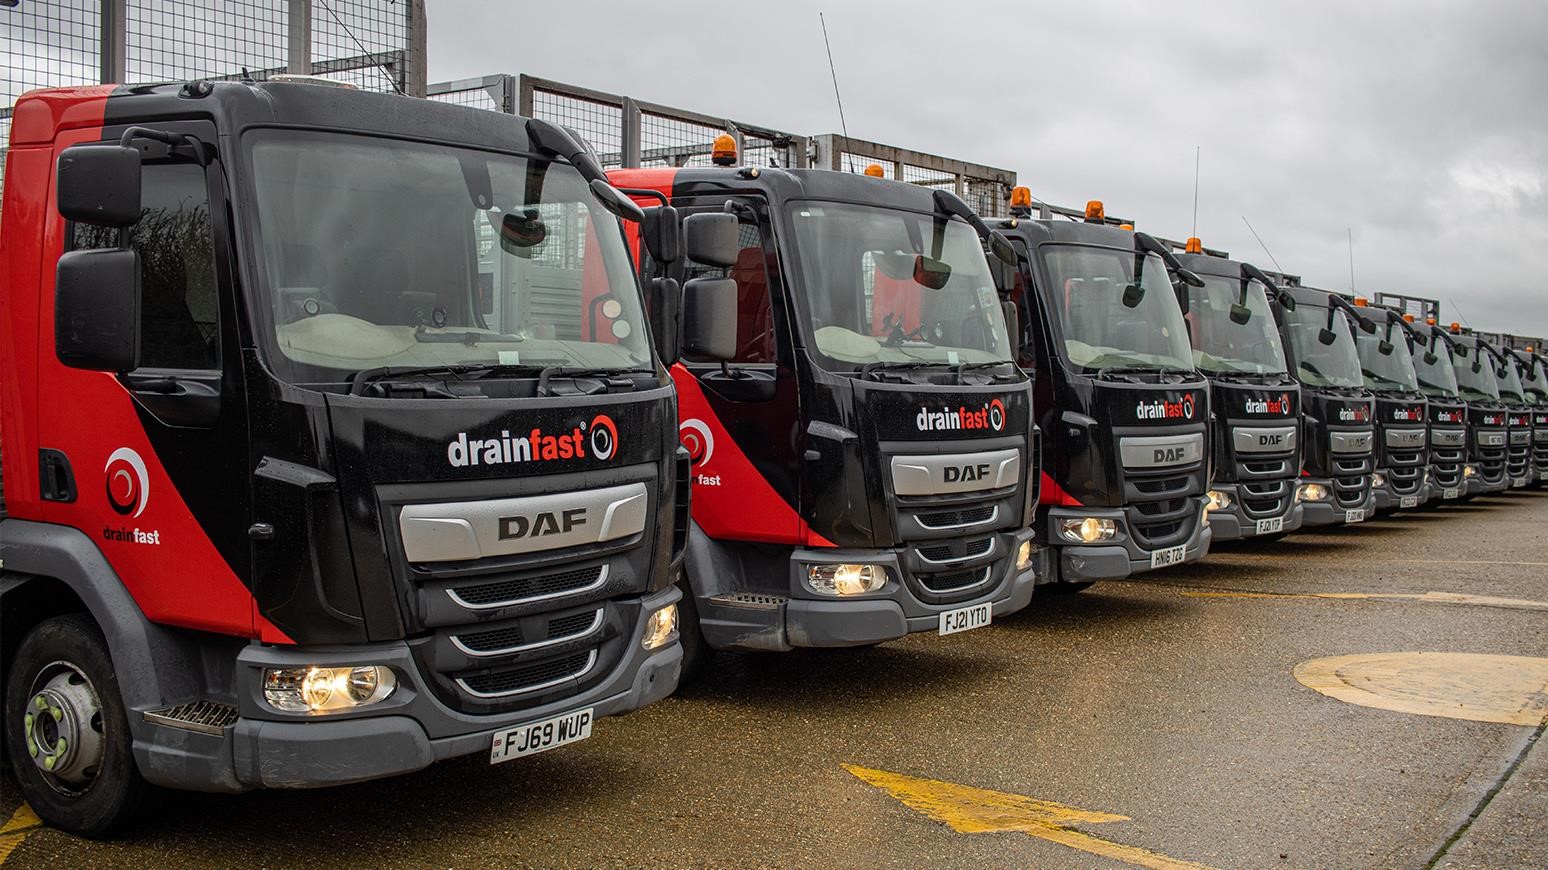 Drainfast Gives Daf LF 180 Fleet New Livery To Celebrate 20th Anniversary